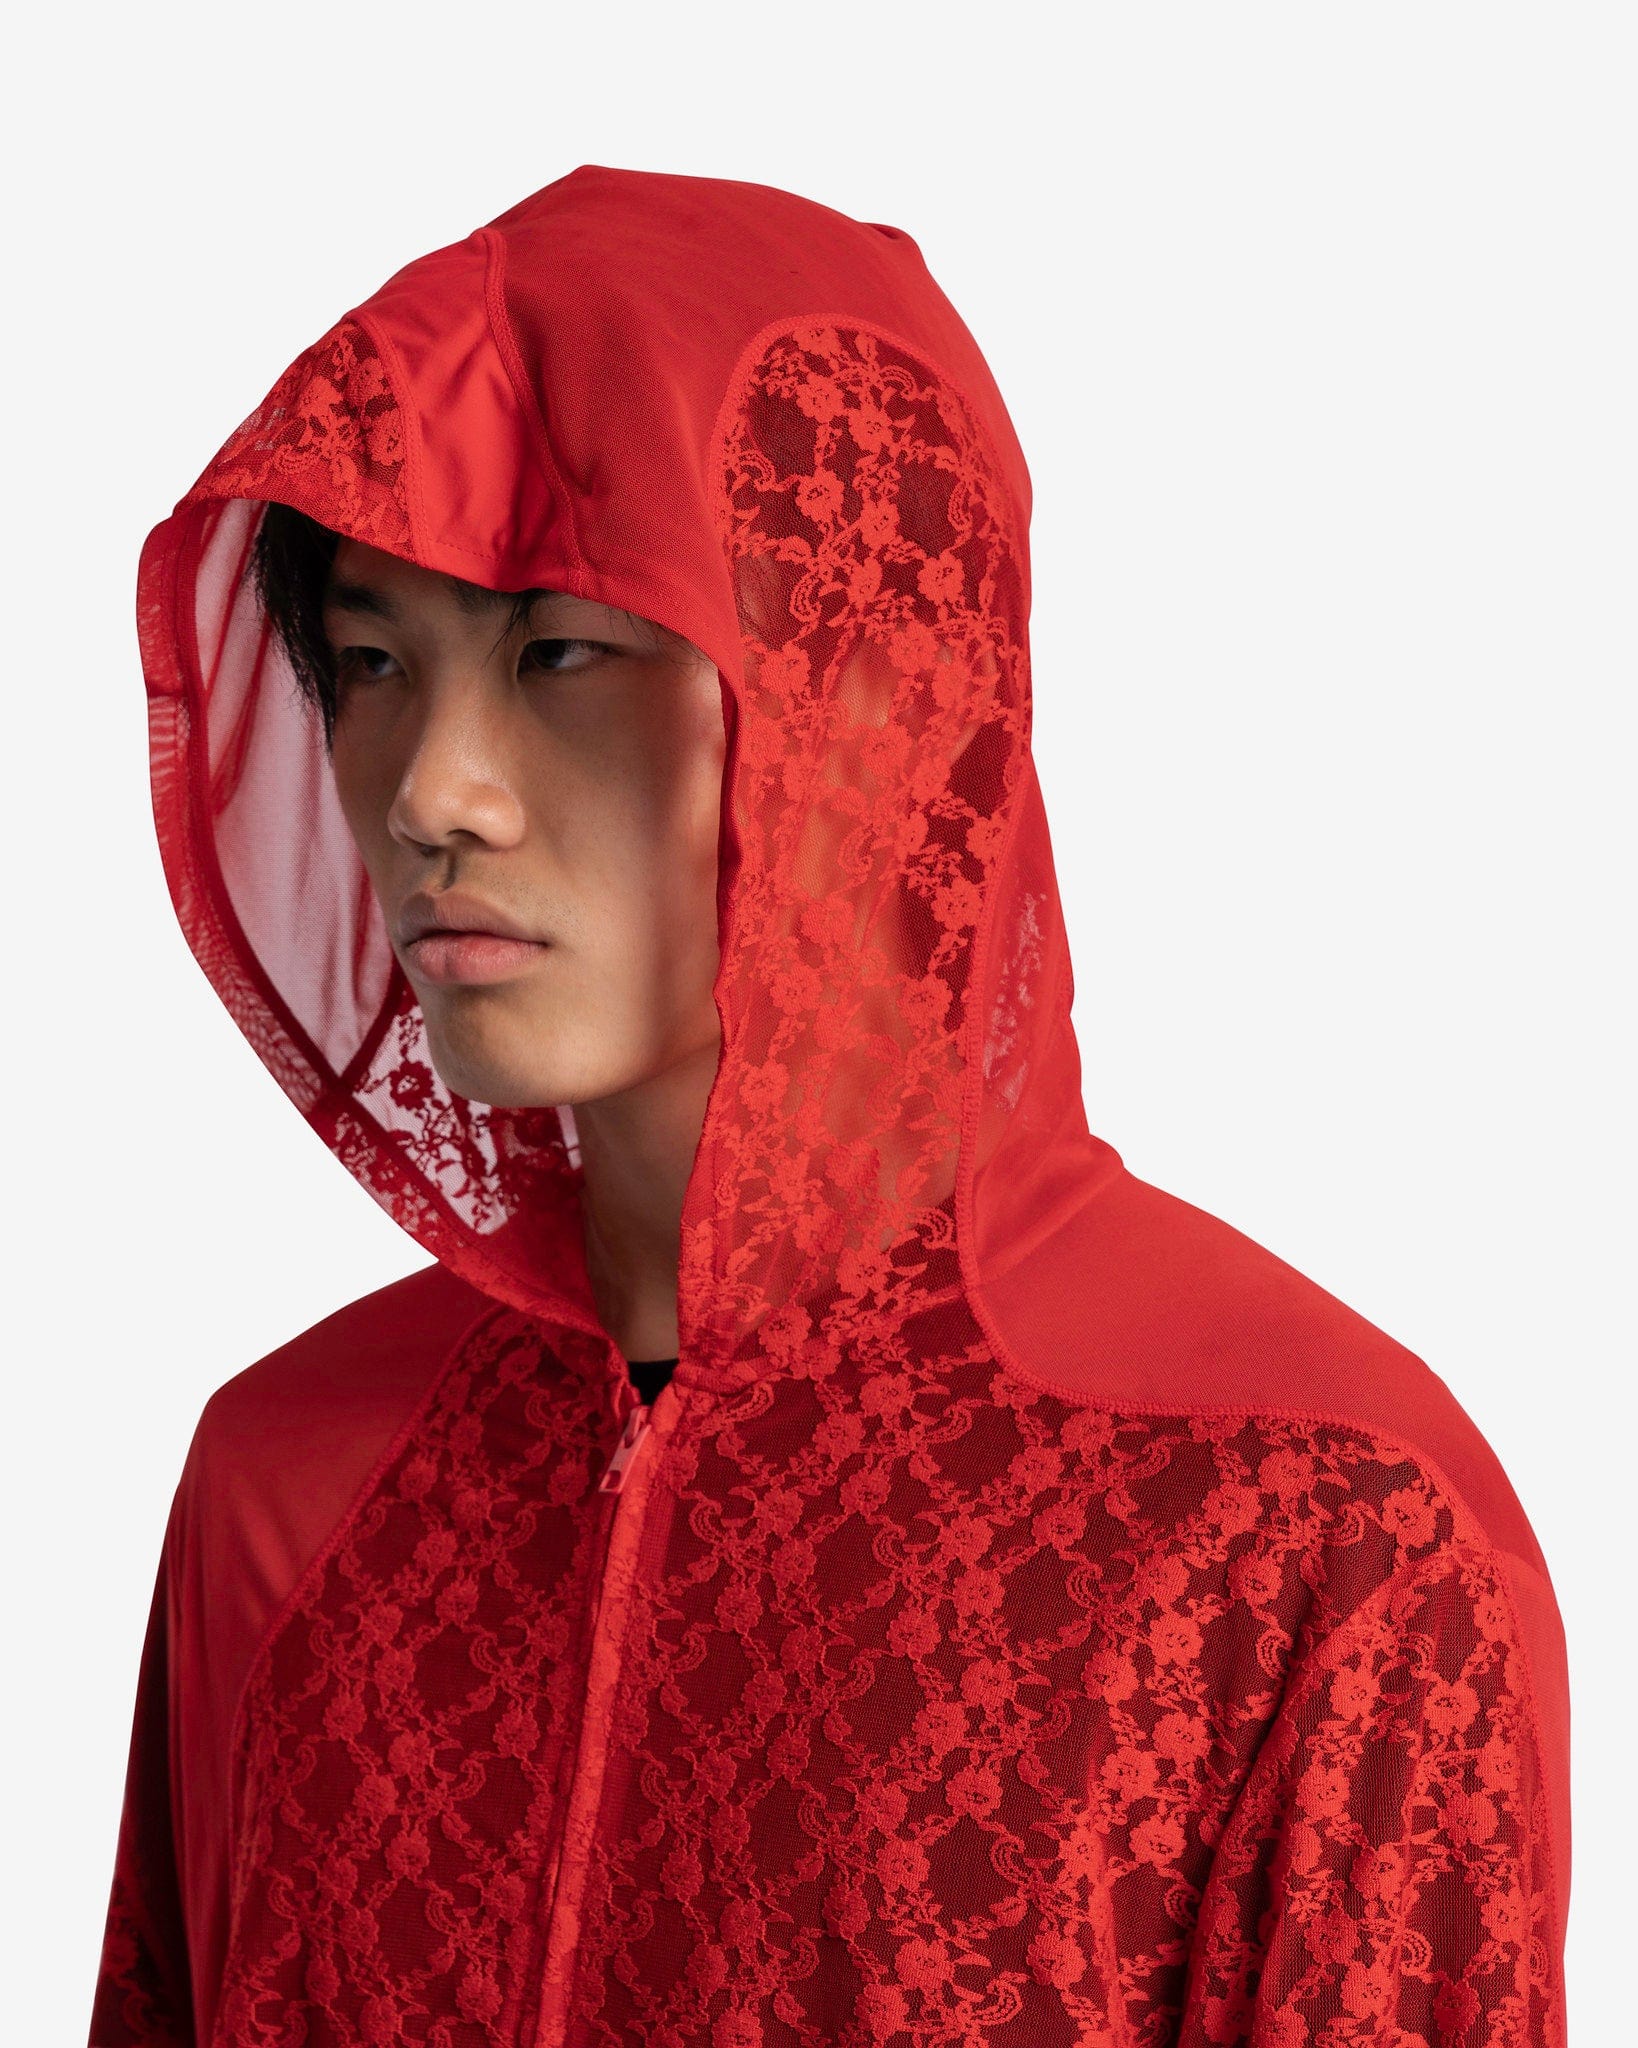 POST ARCHIVE FACTION (P.A.F) Men's Sweatshirts 5.0+ Hoodie Left in Red